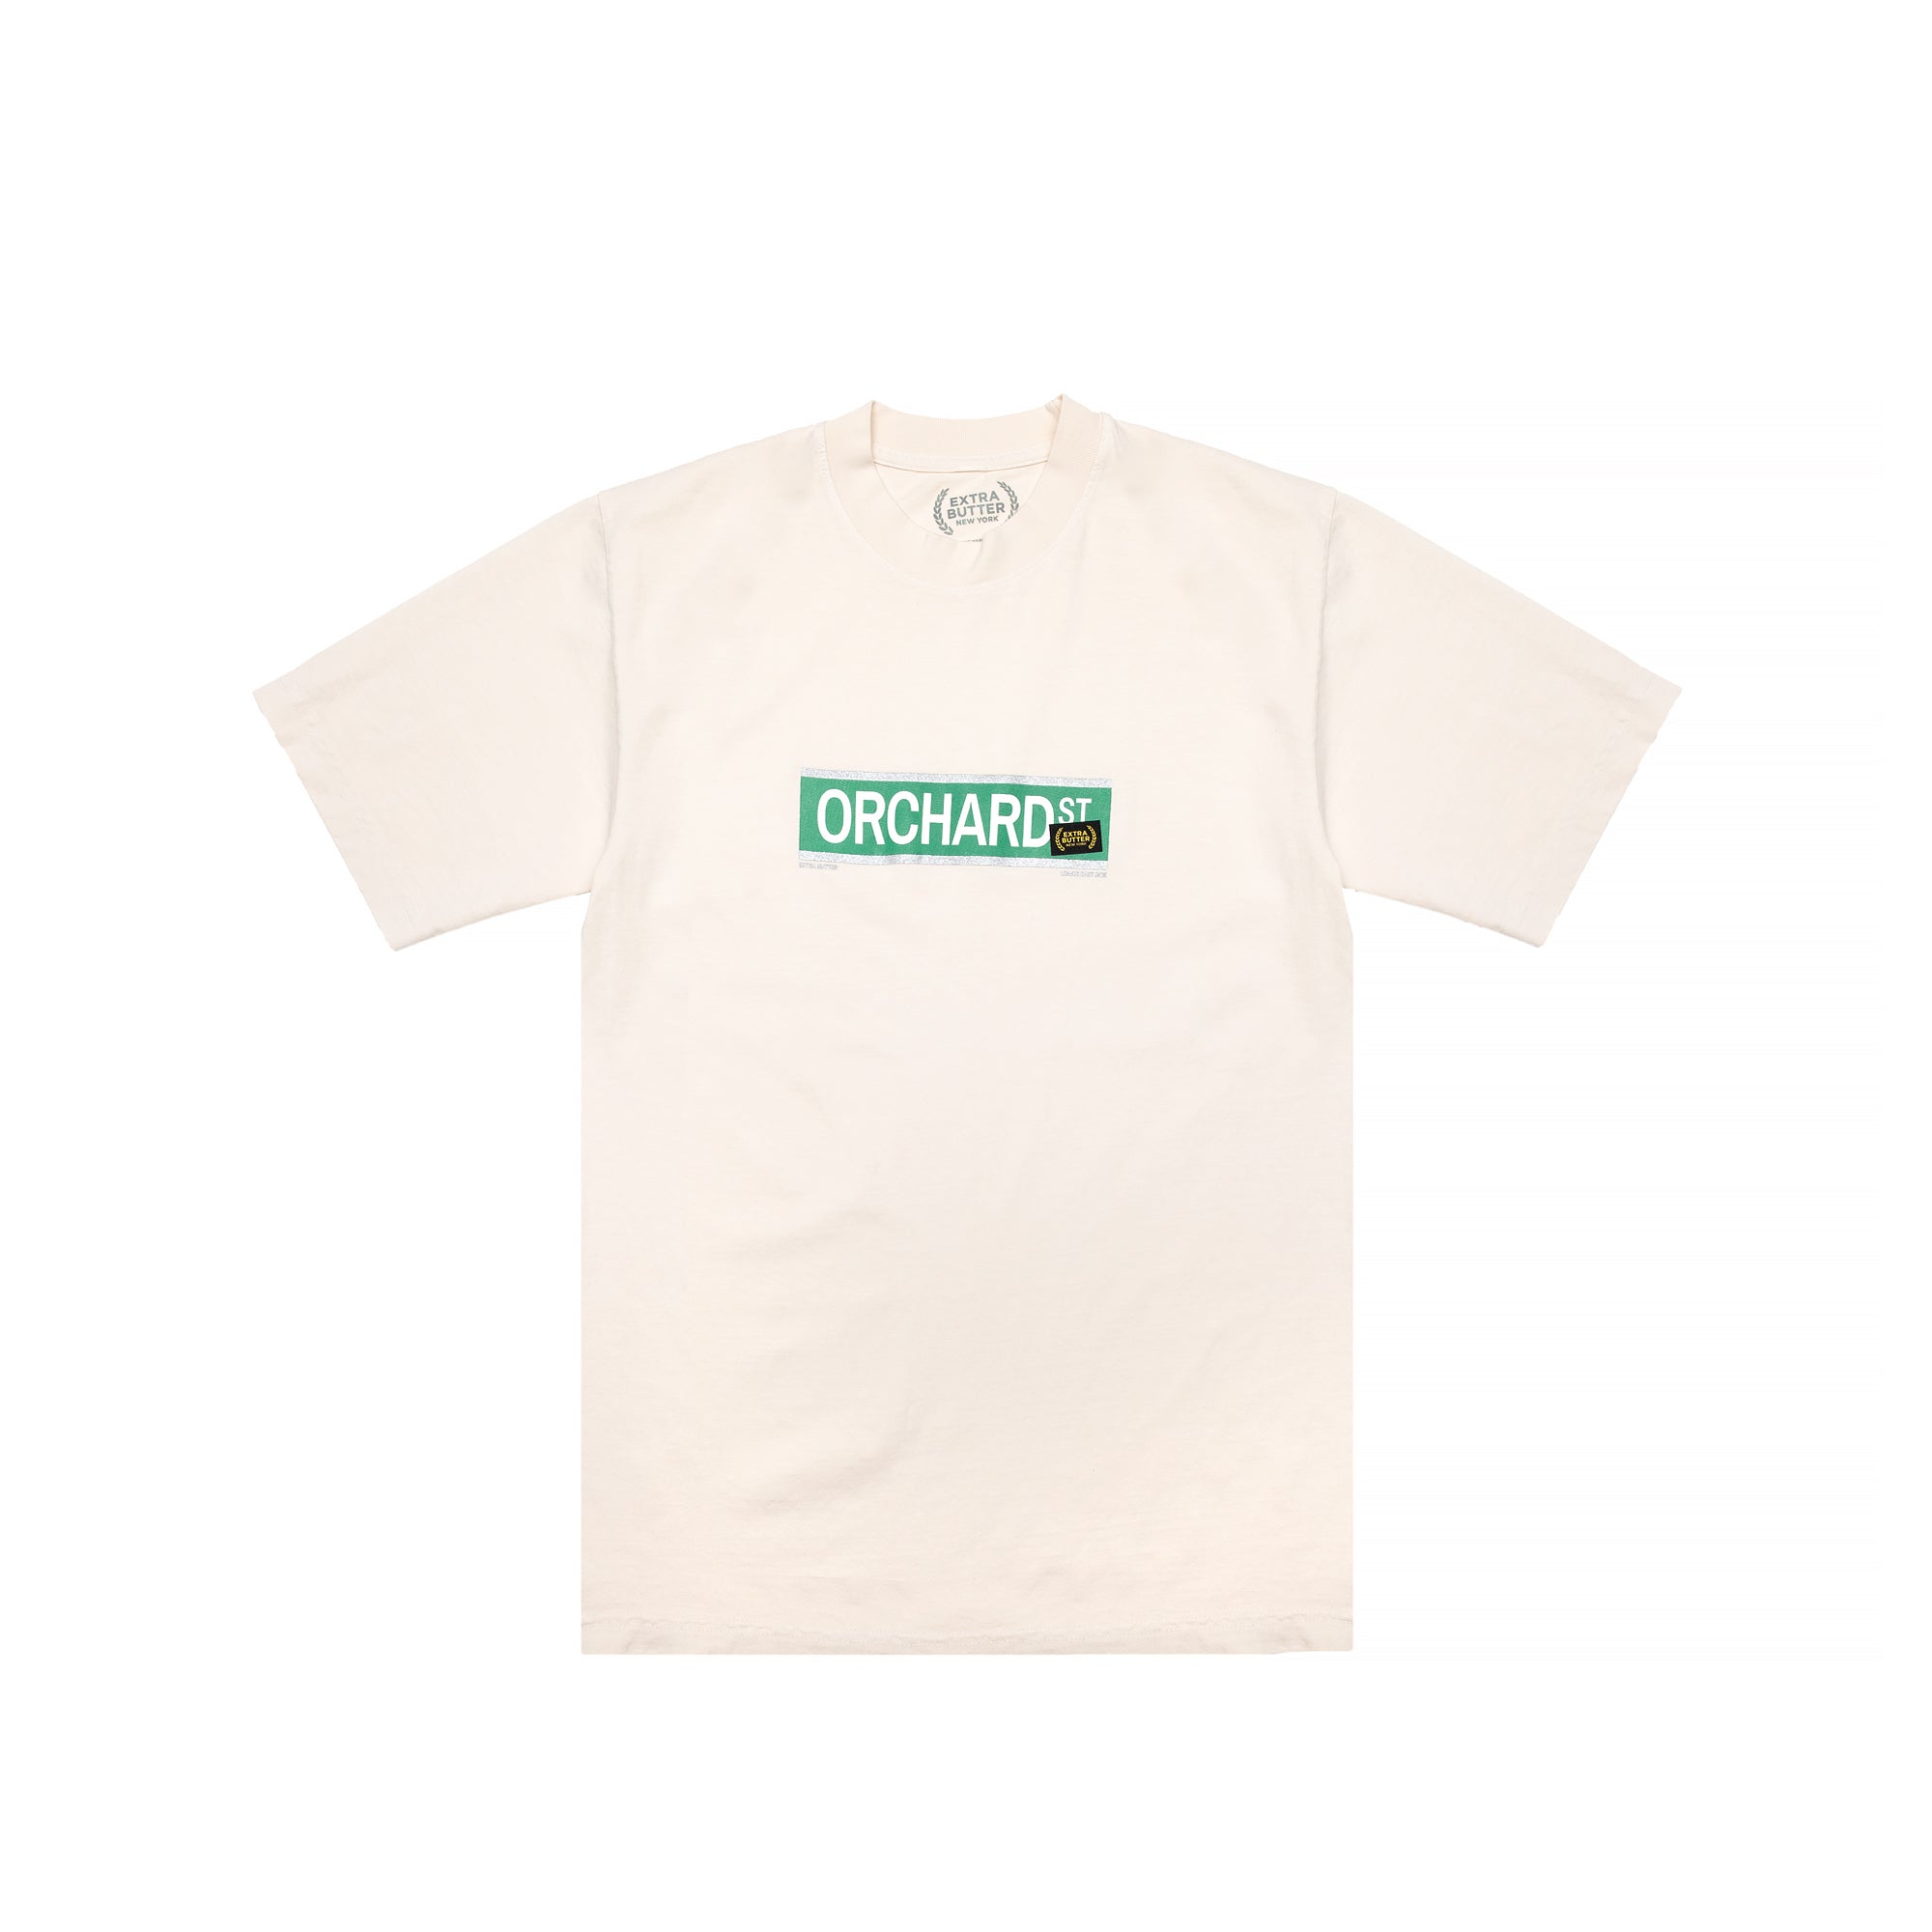 Extra Butter Orchard Street Tee card image